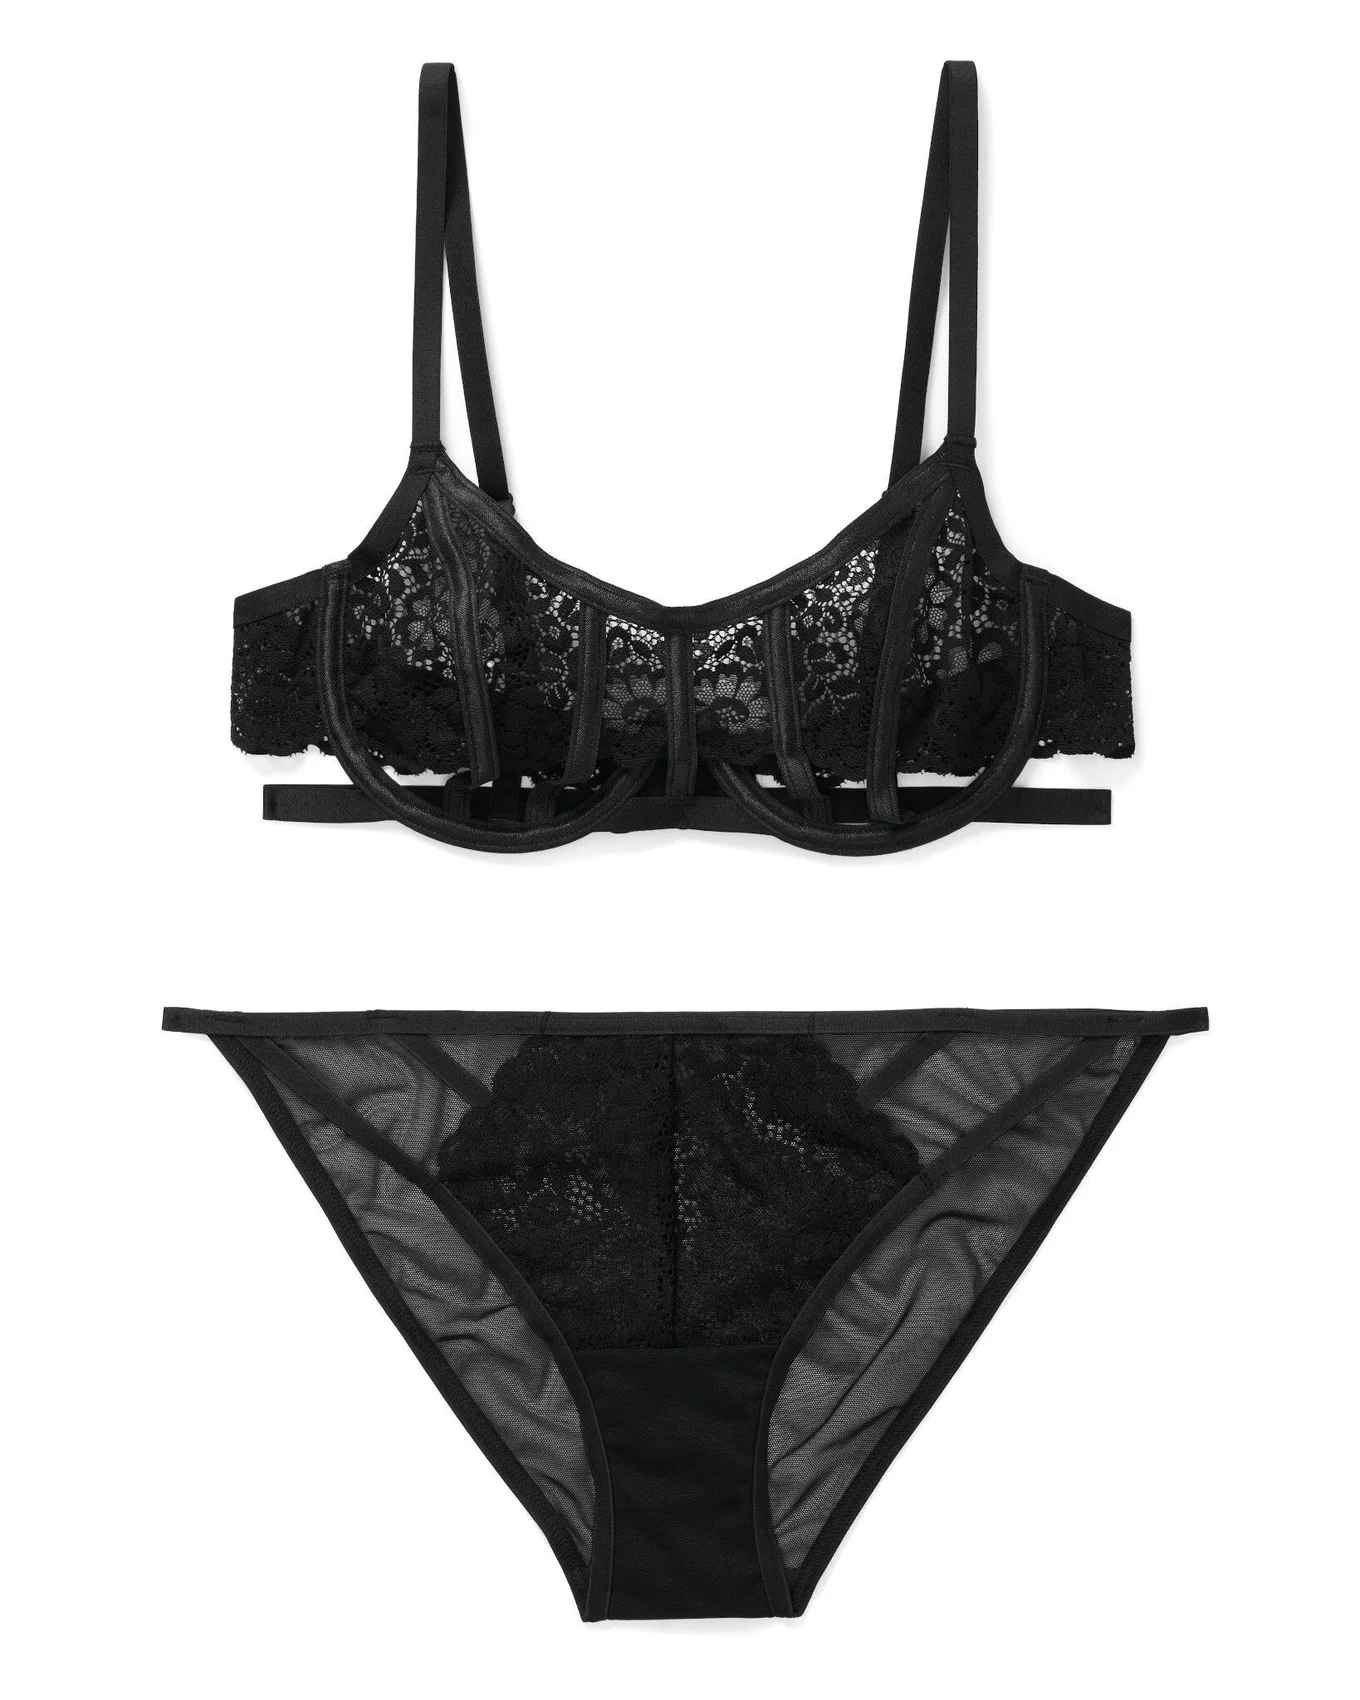 ADORE ME - FULL CUP BRA - SIZE 38D - JET BLACK NWT